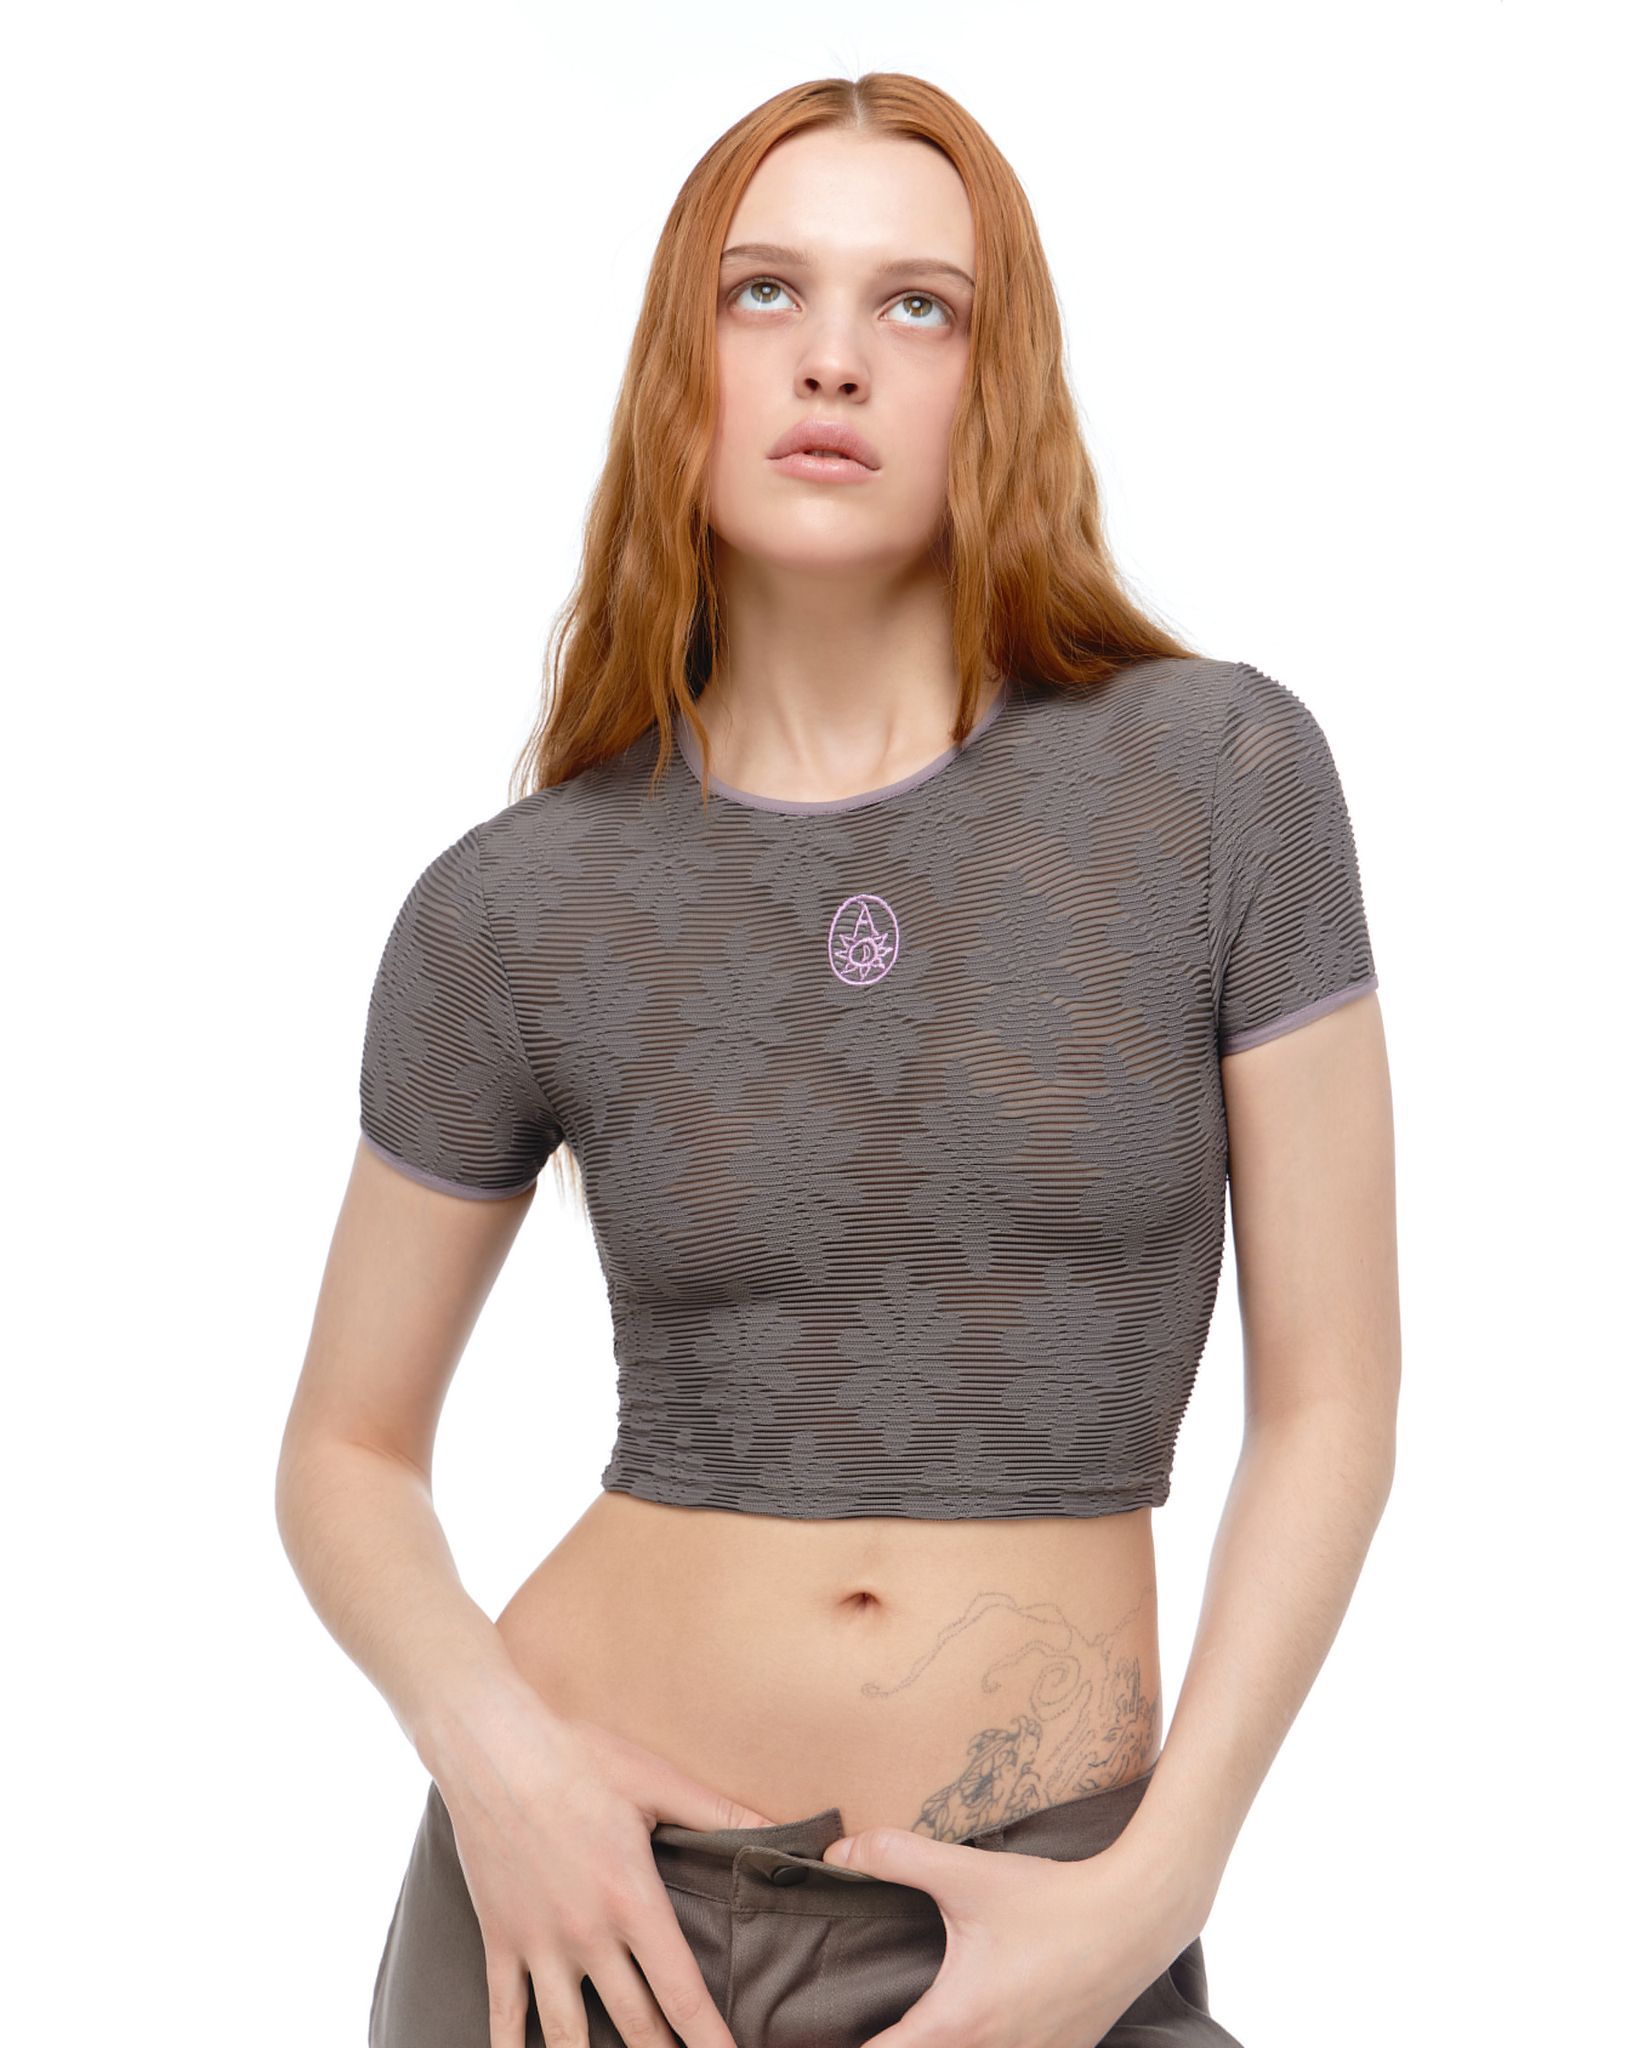 Swampy Daisy Crop Top | Outlaw Moscow